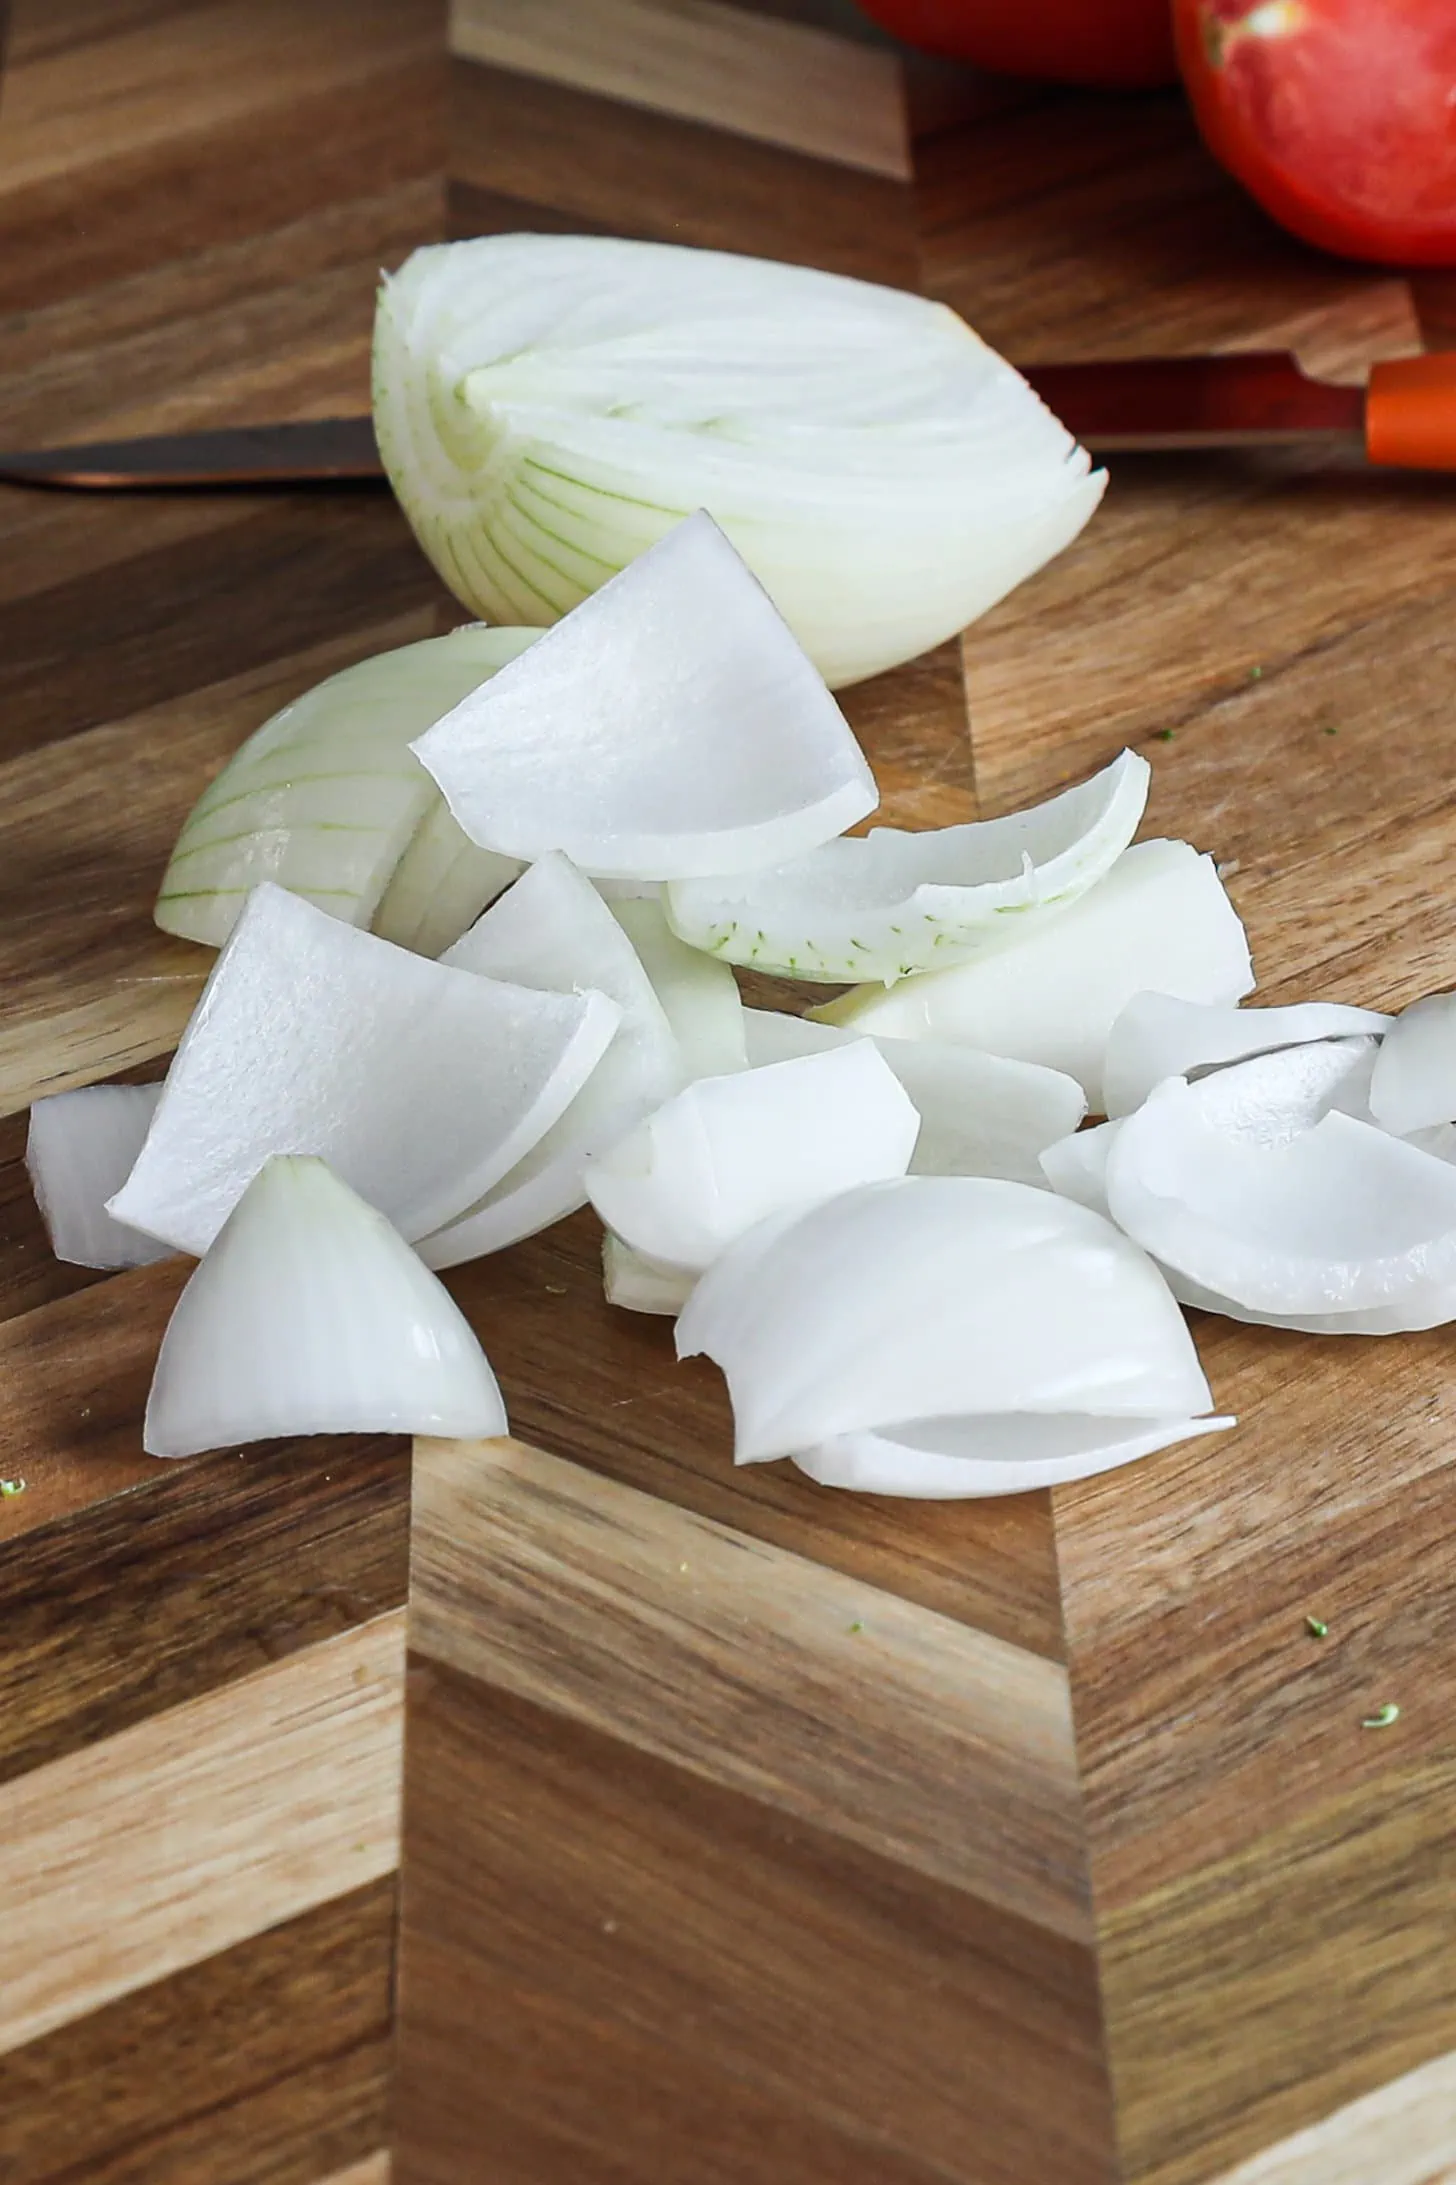 slices of white onion on a wooden board.